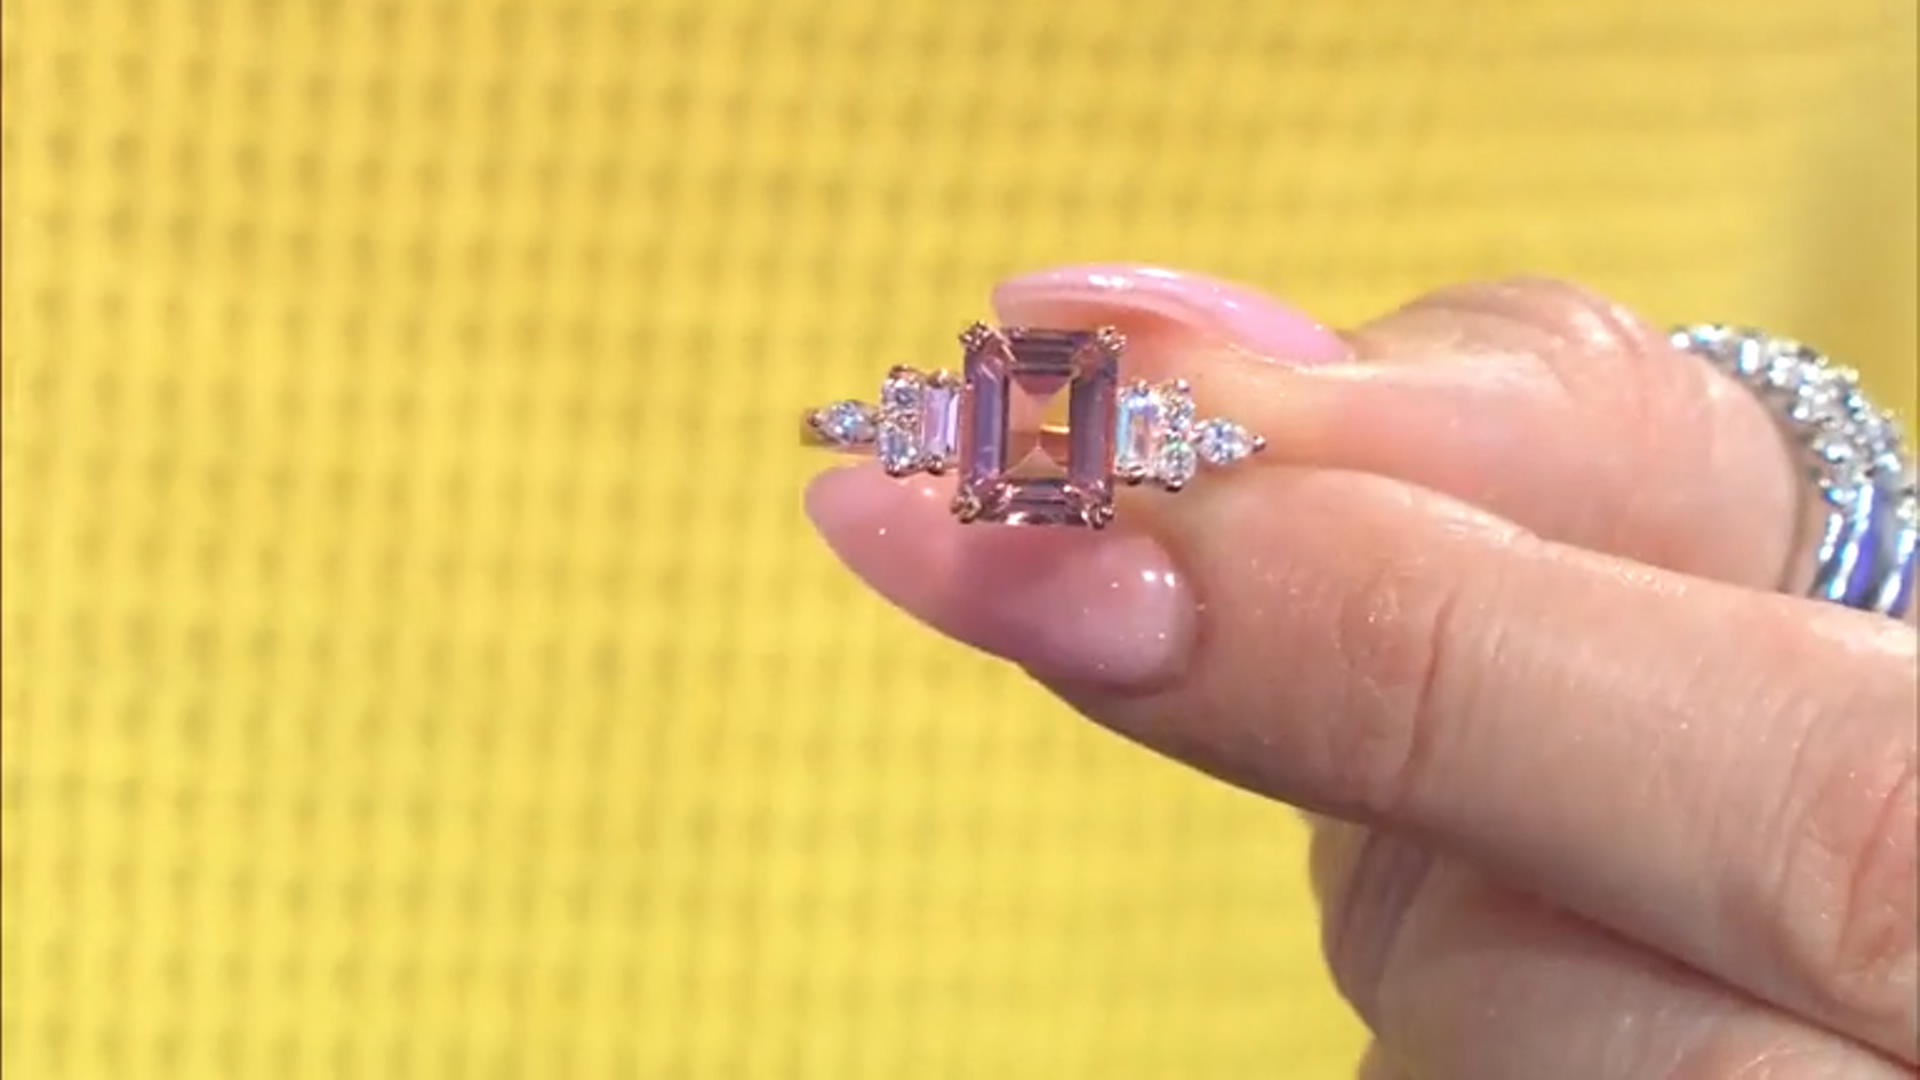 Morganite Simulant And White Cubic Zirconia 18k Rose Gold Over Sterling Silver Ring 3.03ctw Video Thumbnail